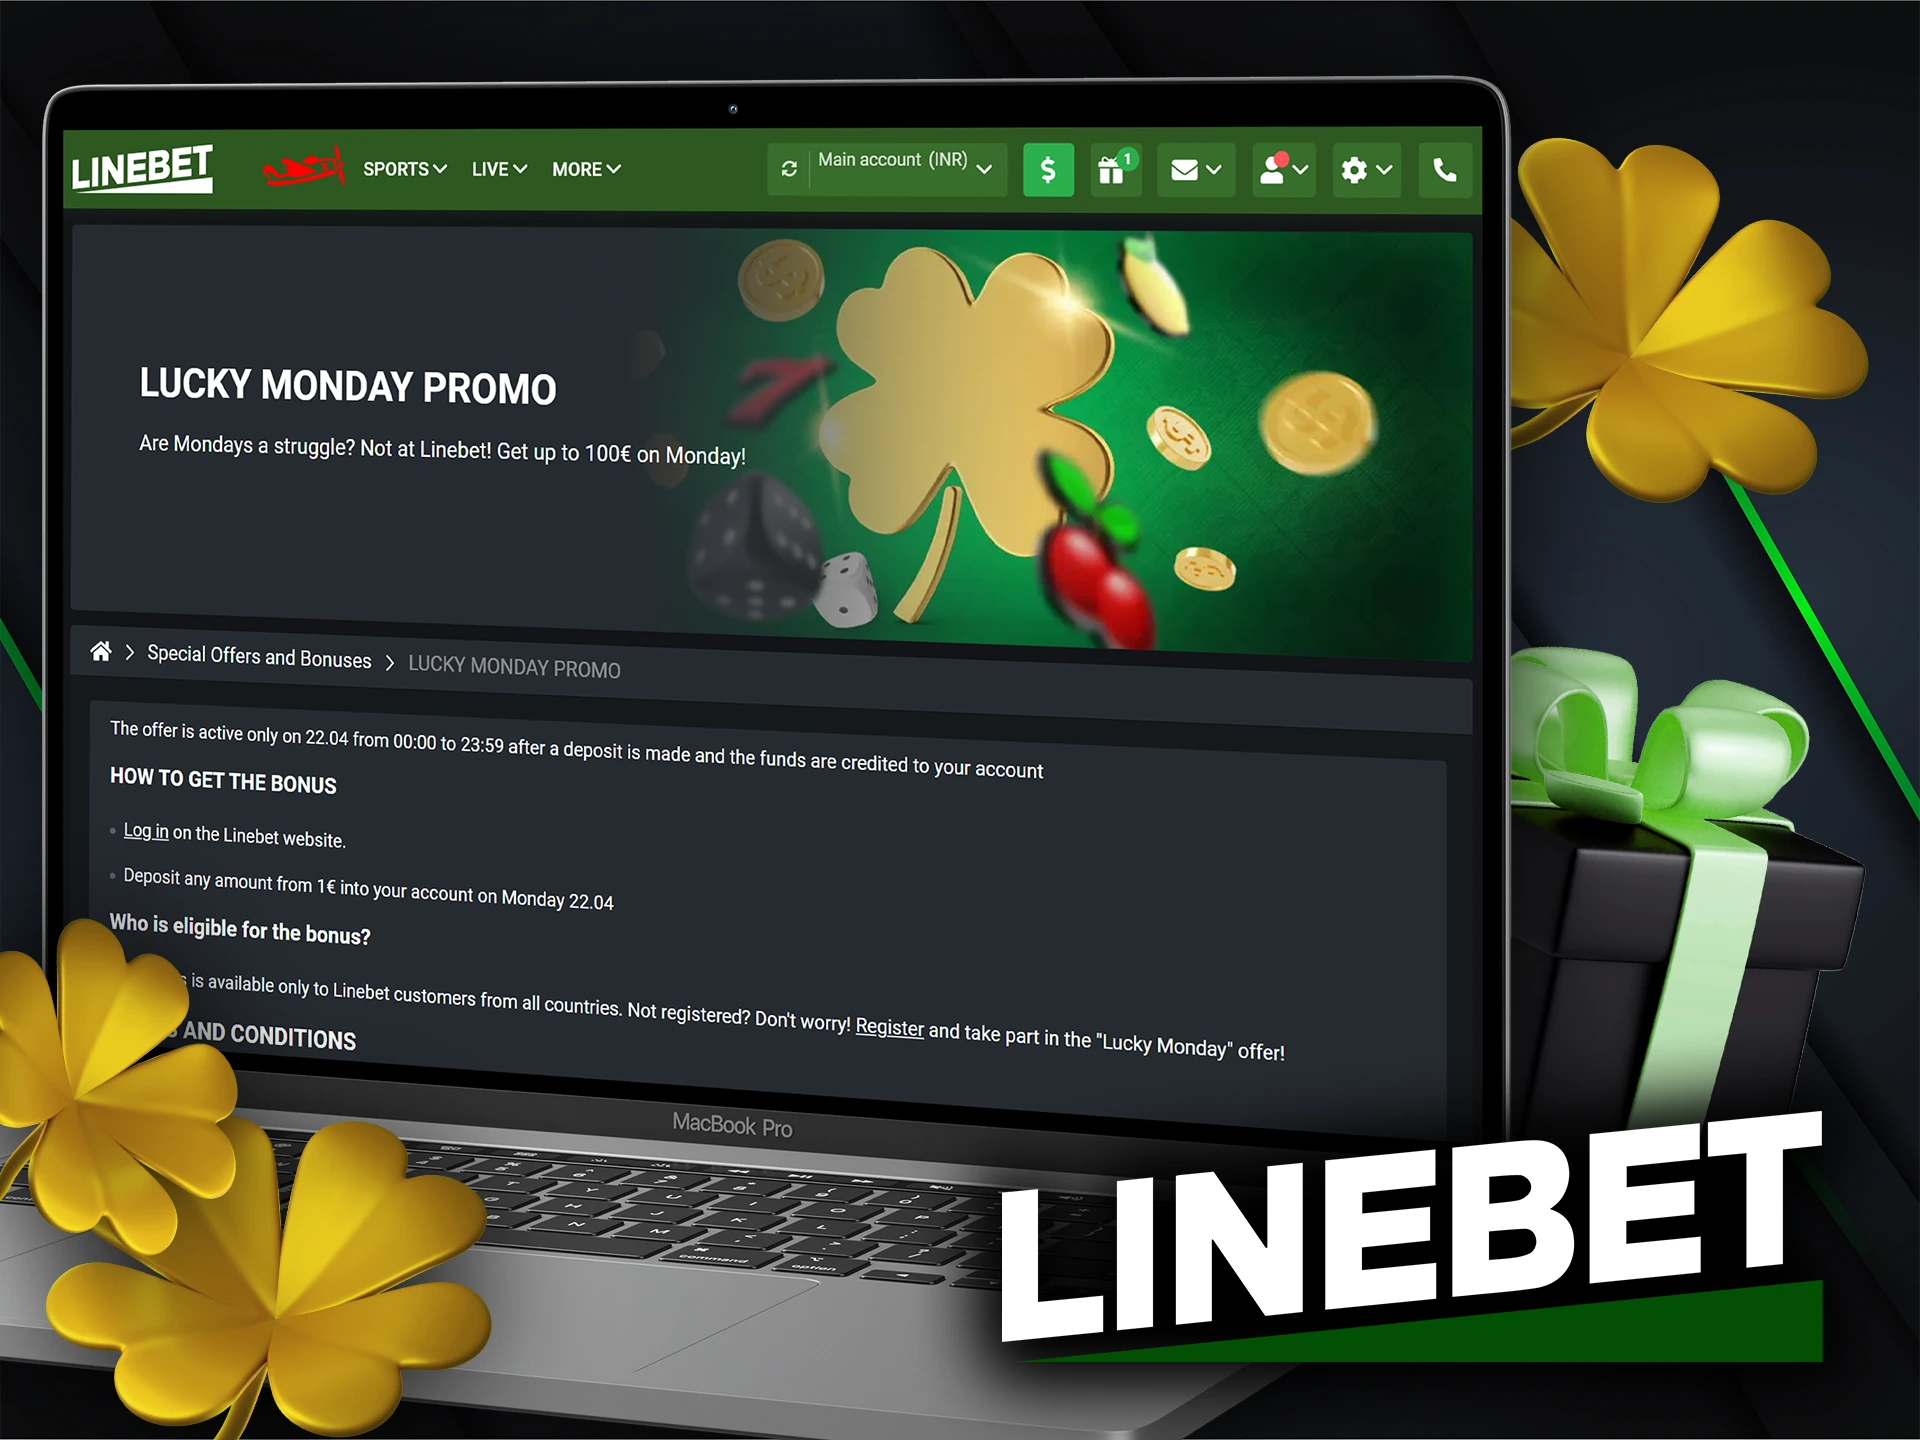 Visit Linebet's website on Monday and double your deposit amount.